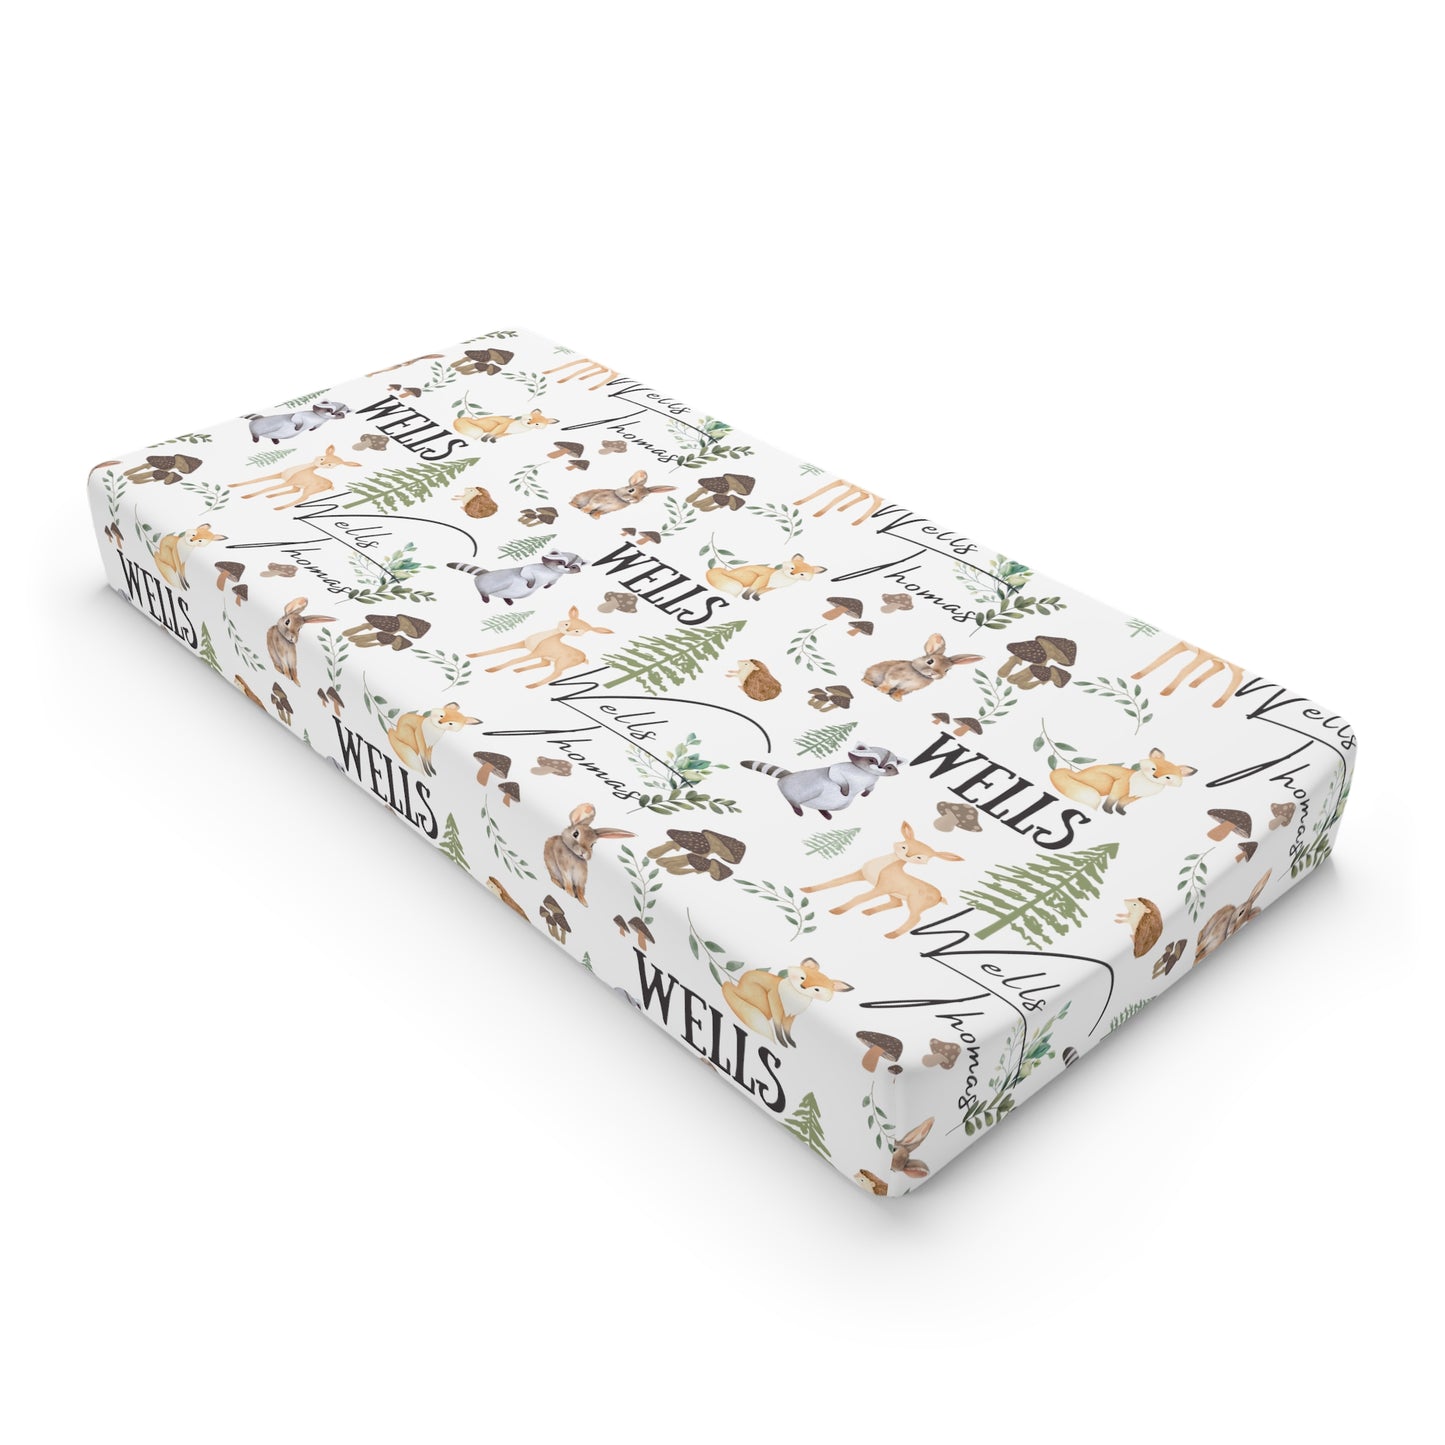 Customized Name Baby Changing Pad Cover | Woodland Animals with Brown Mushrooms